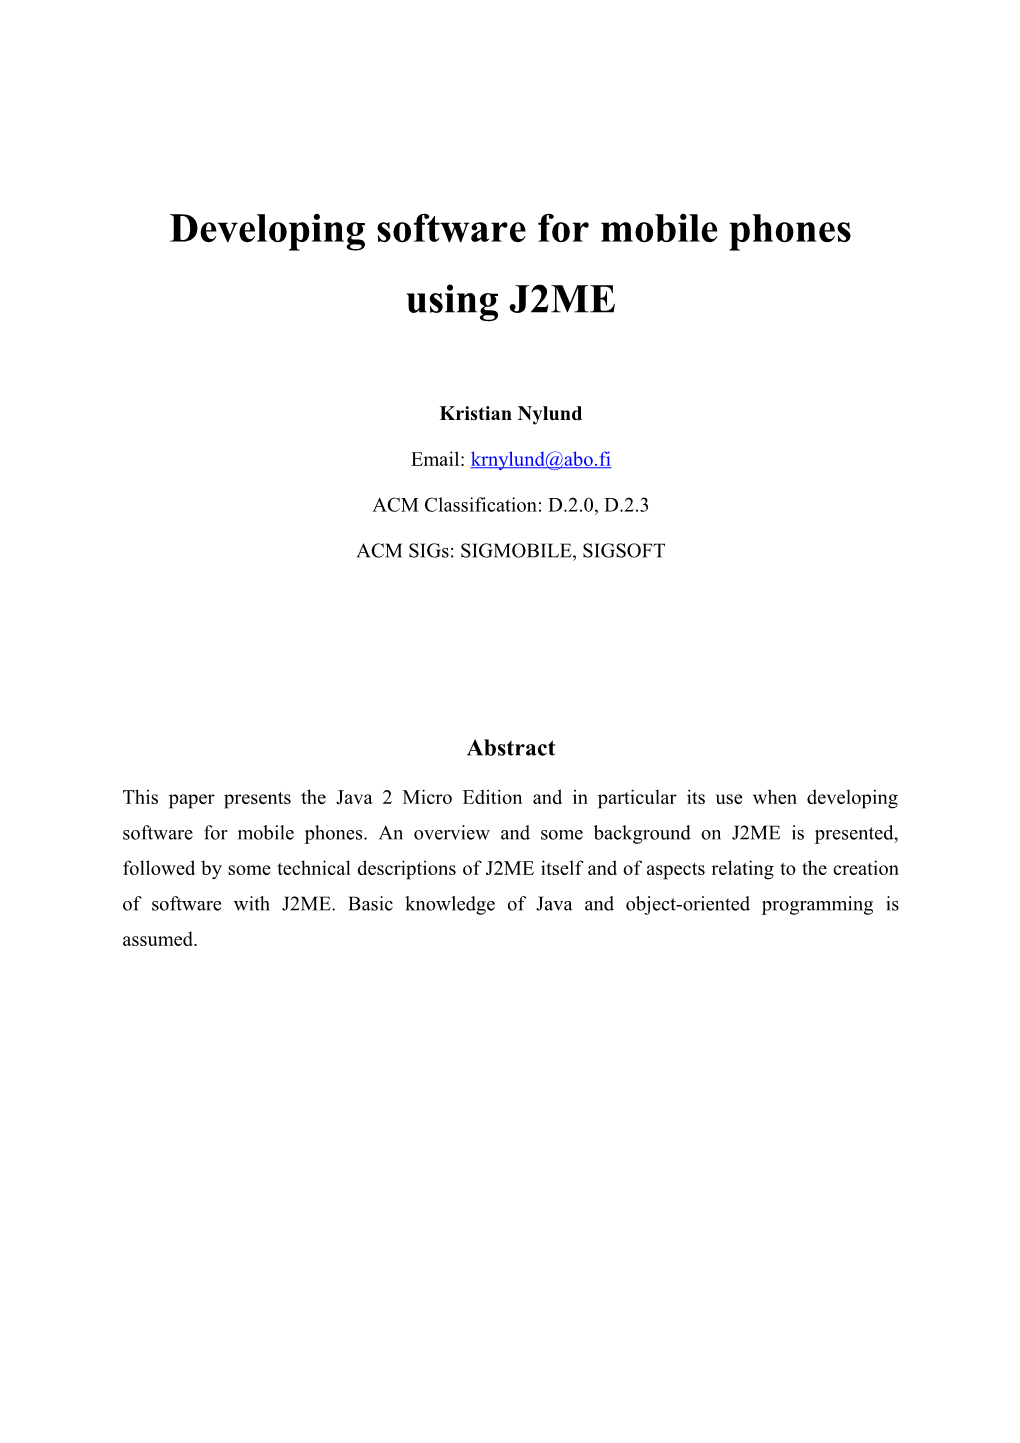 Developing Software for Mobile Phones Using J2ME